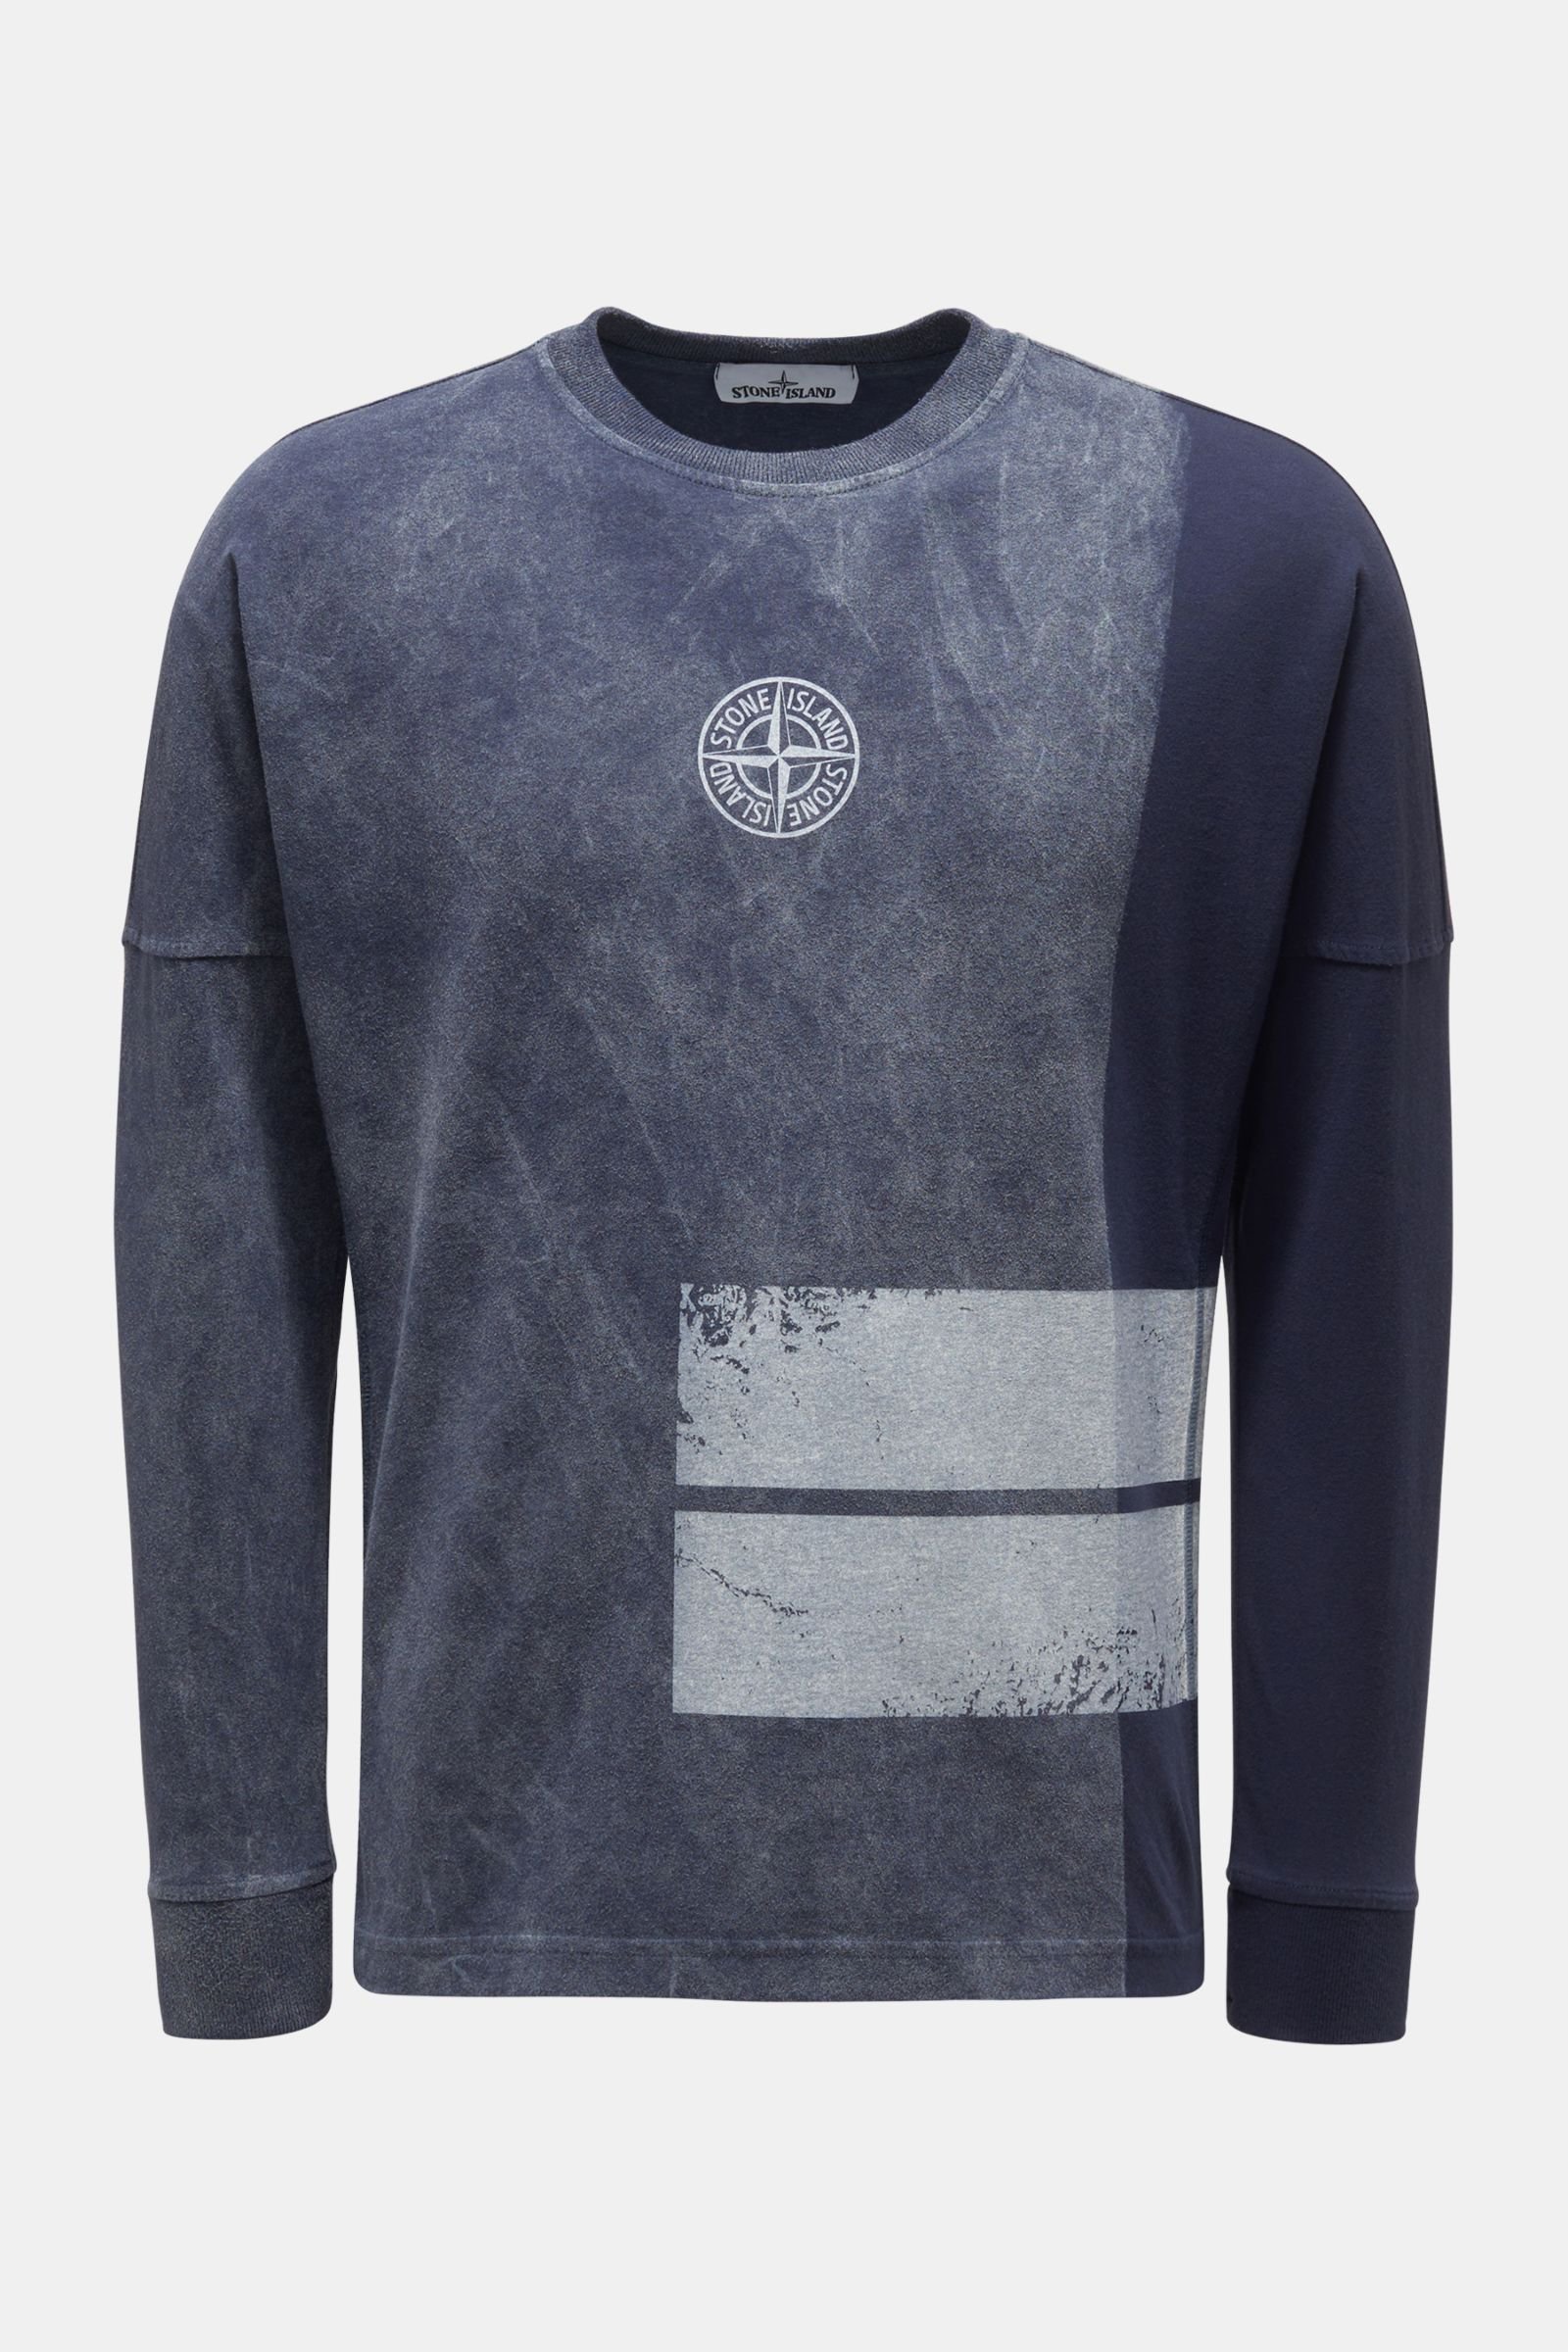 Long sleeve 'Dust Two' grey-blue/navy